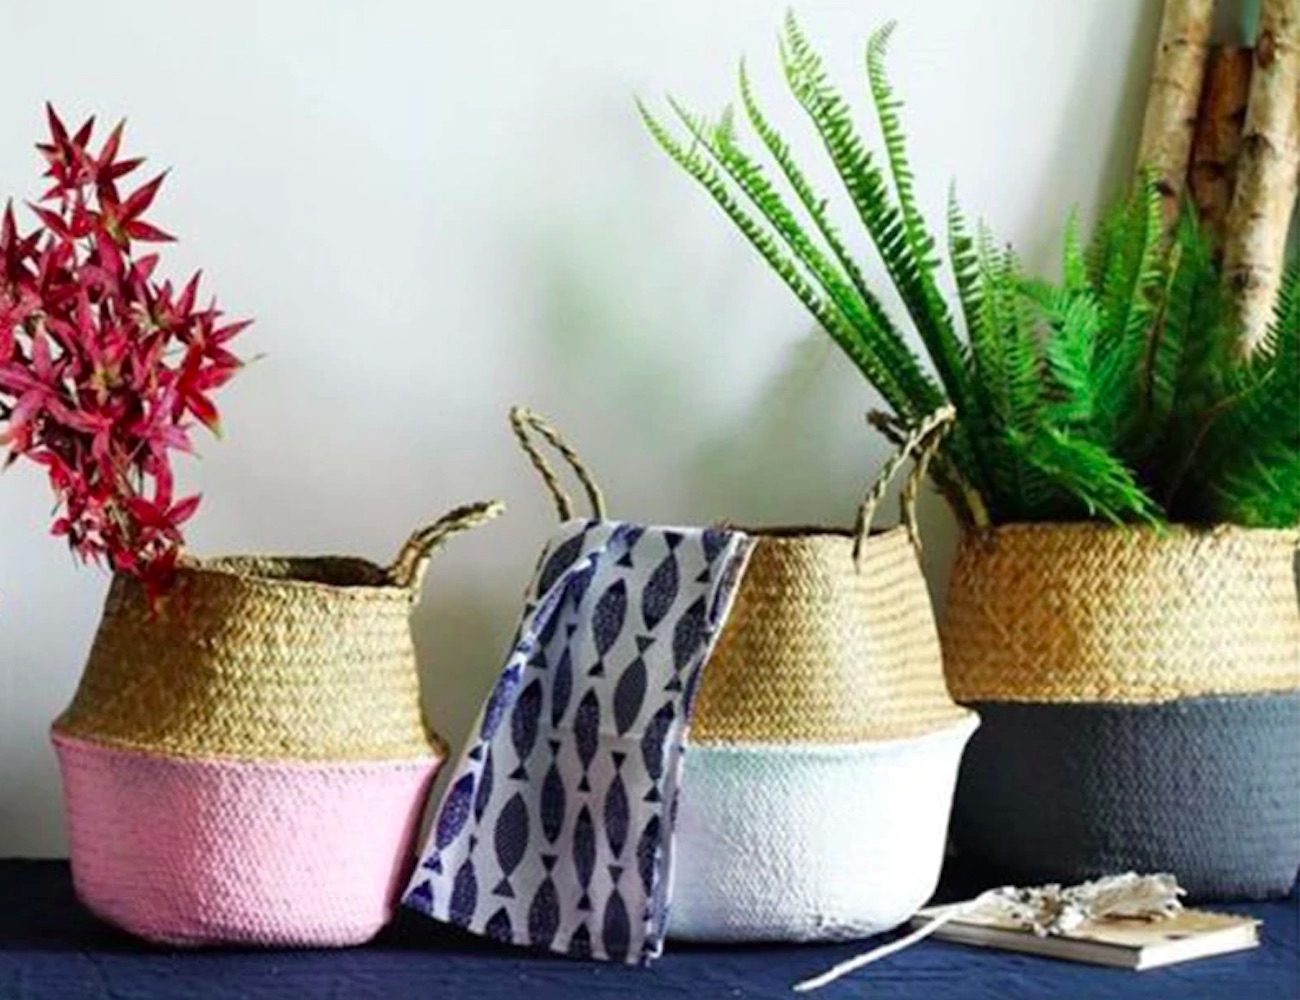 Handmade Seagrass Wicker Storage Baskets come with a pop of color